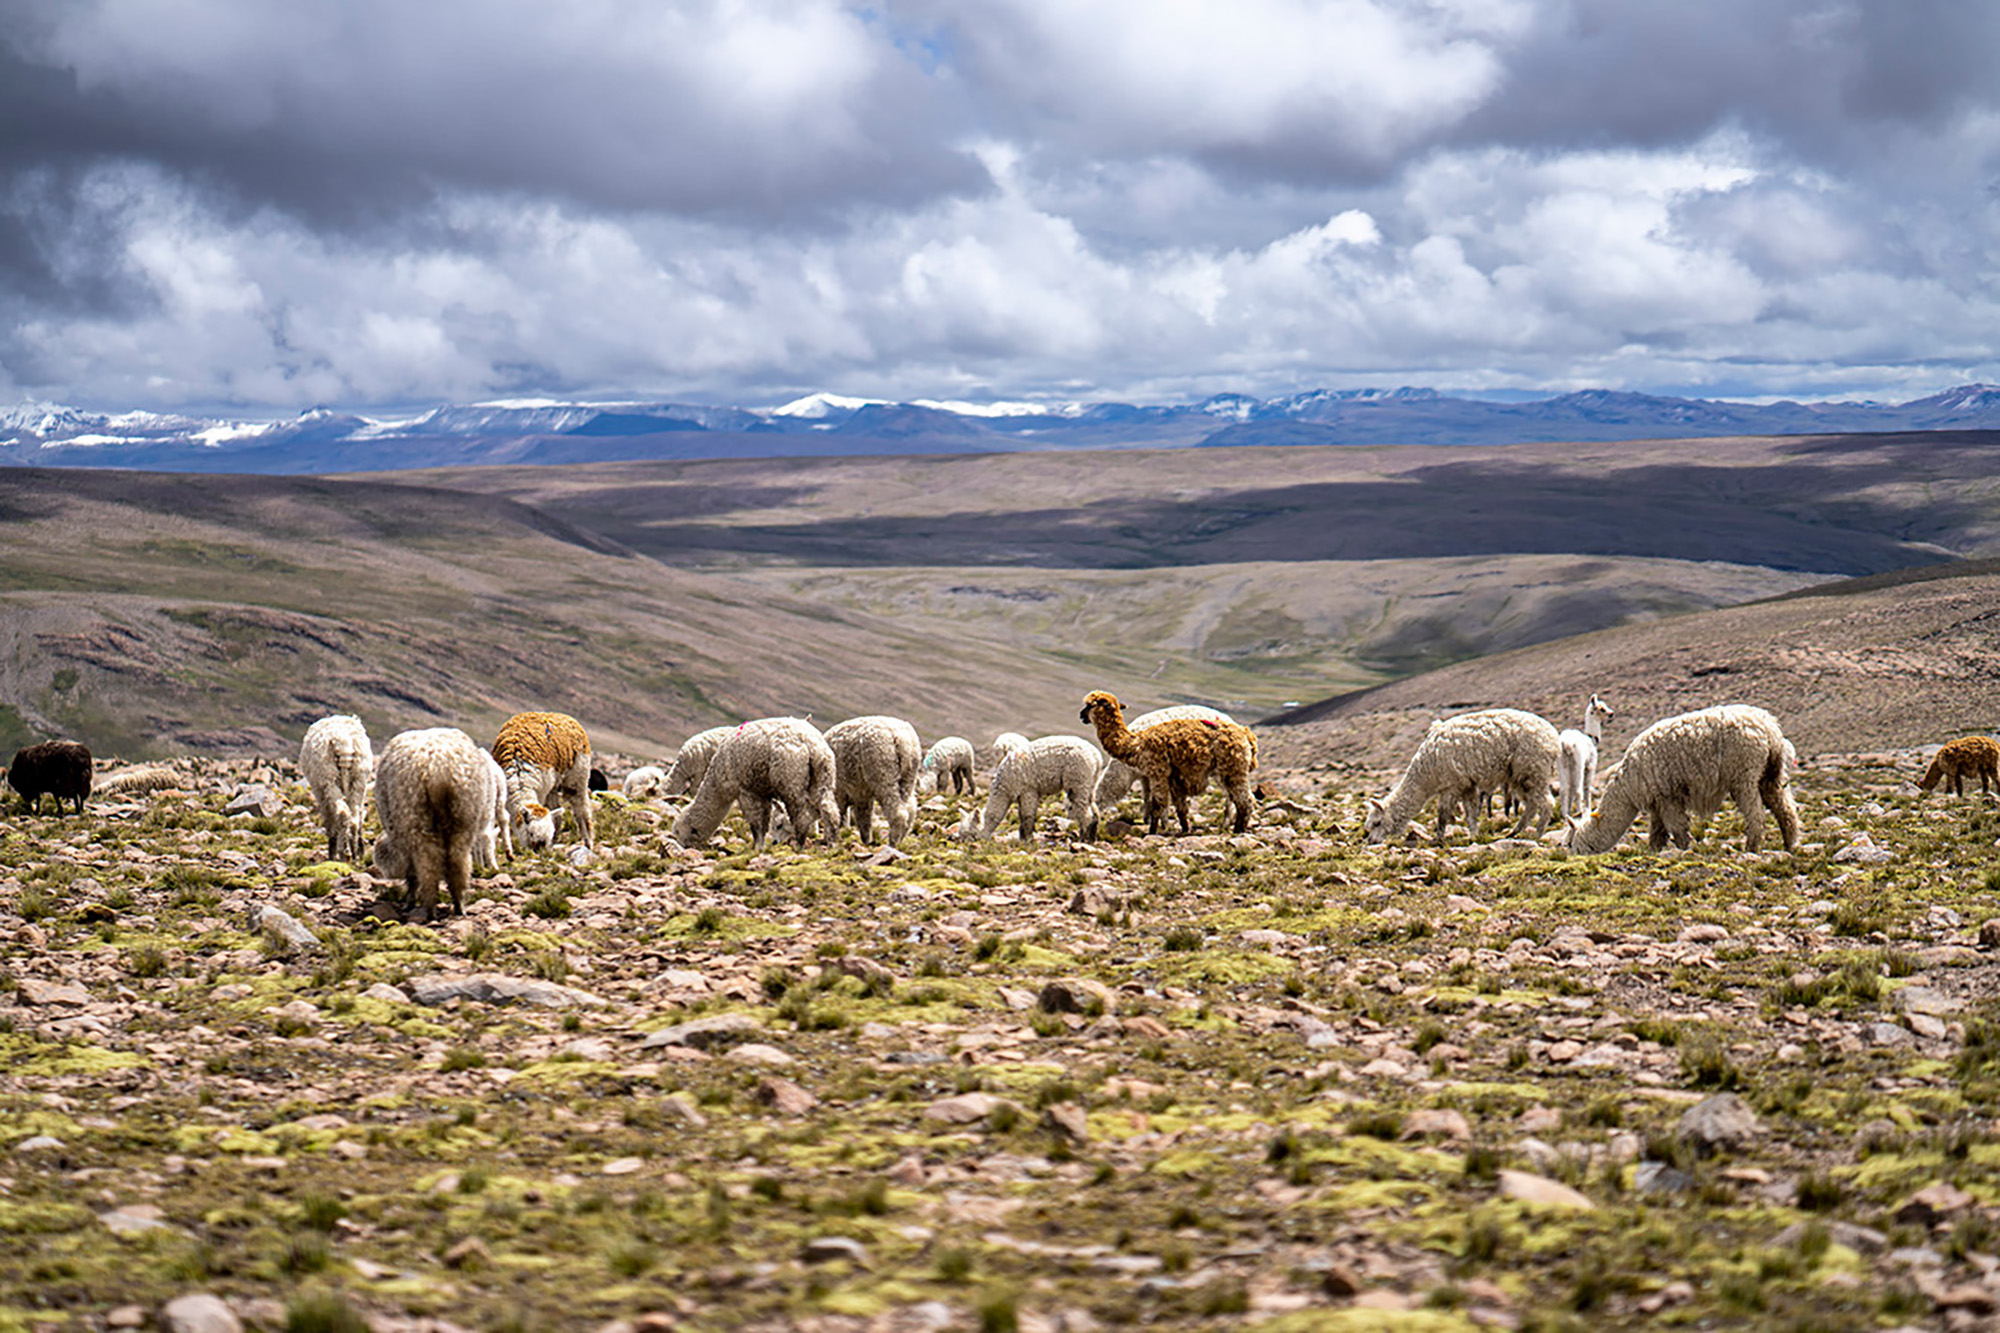 A group of lamas and alpacas in a mountain landscape.